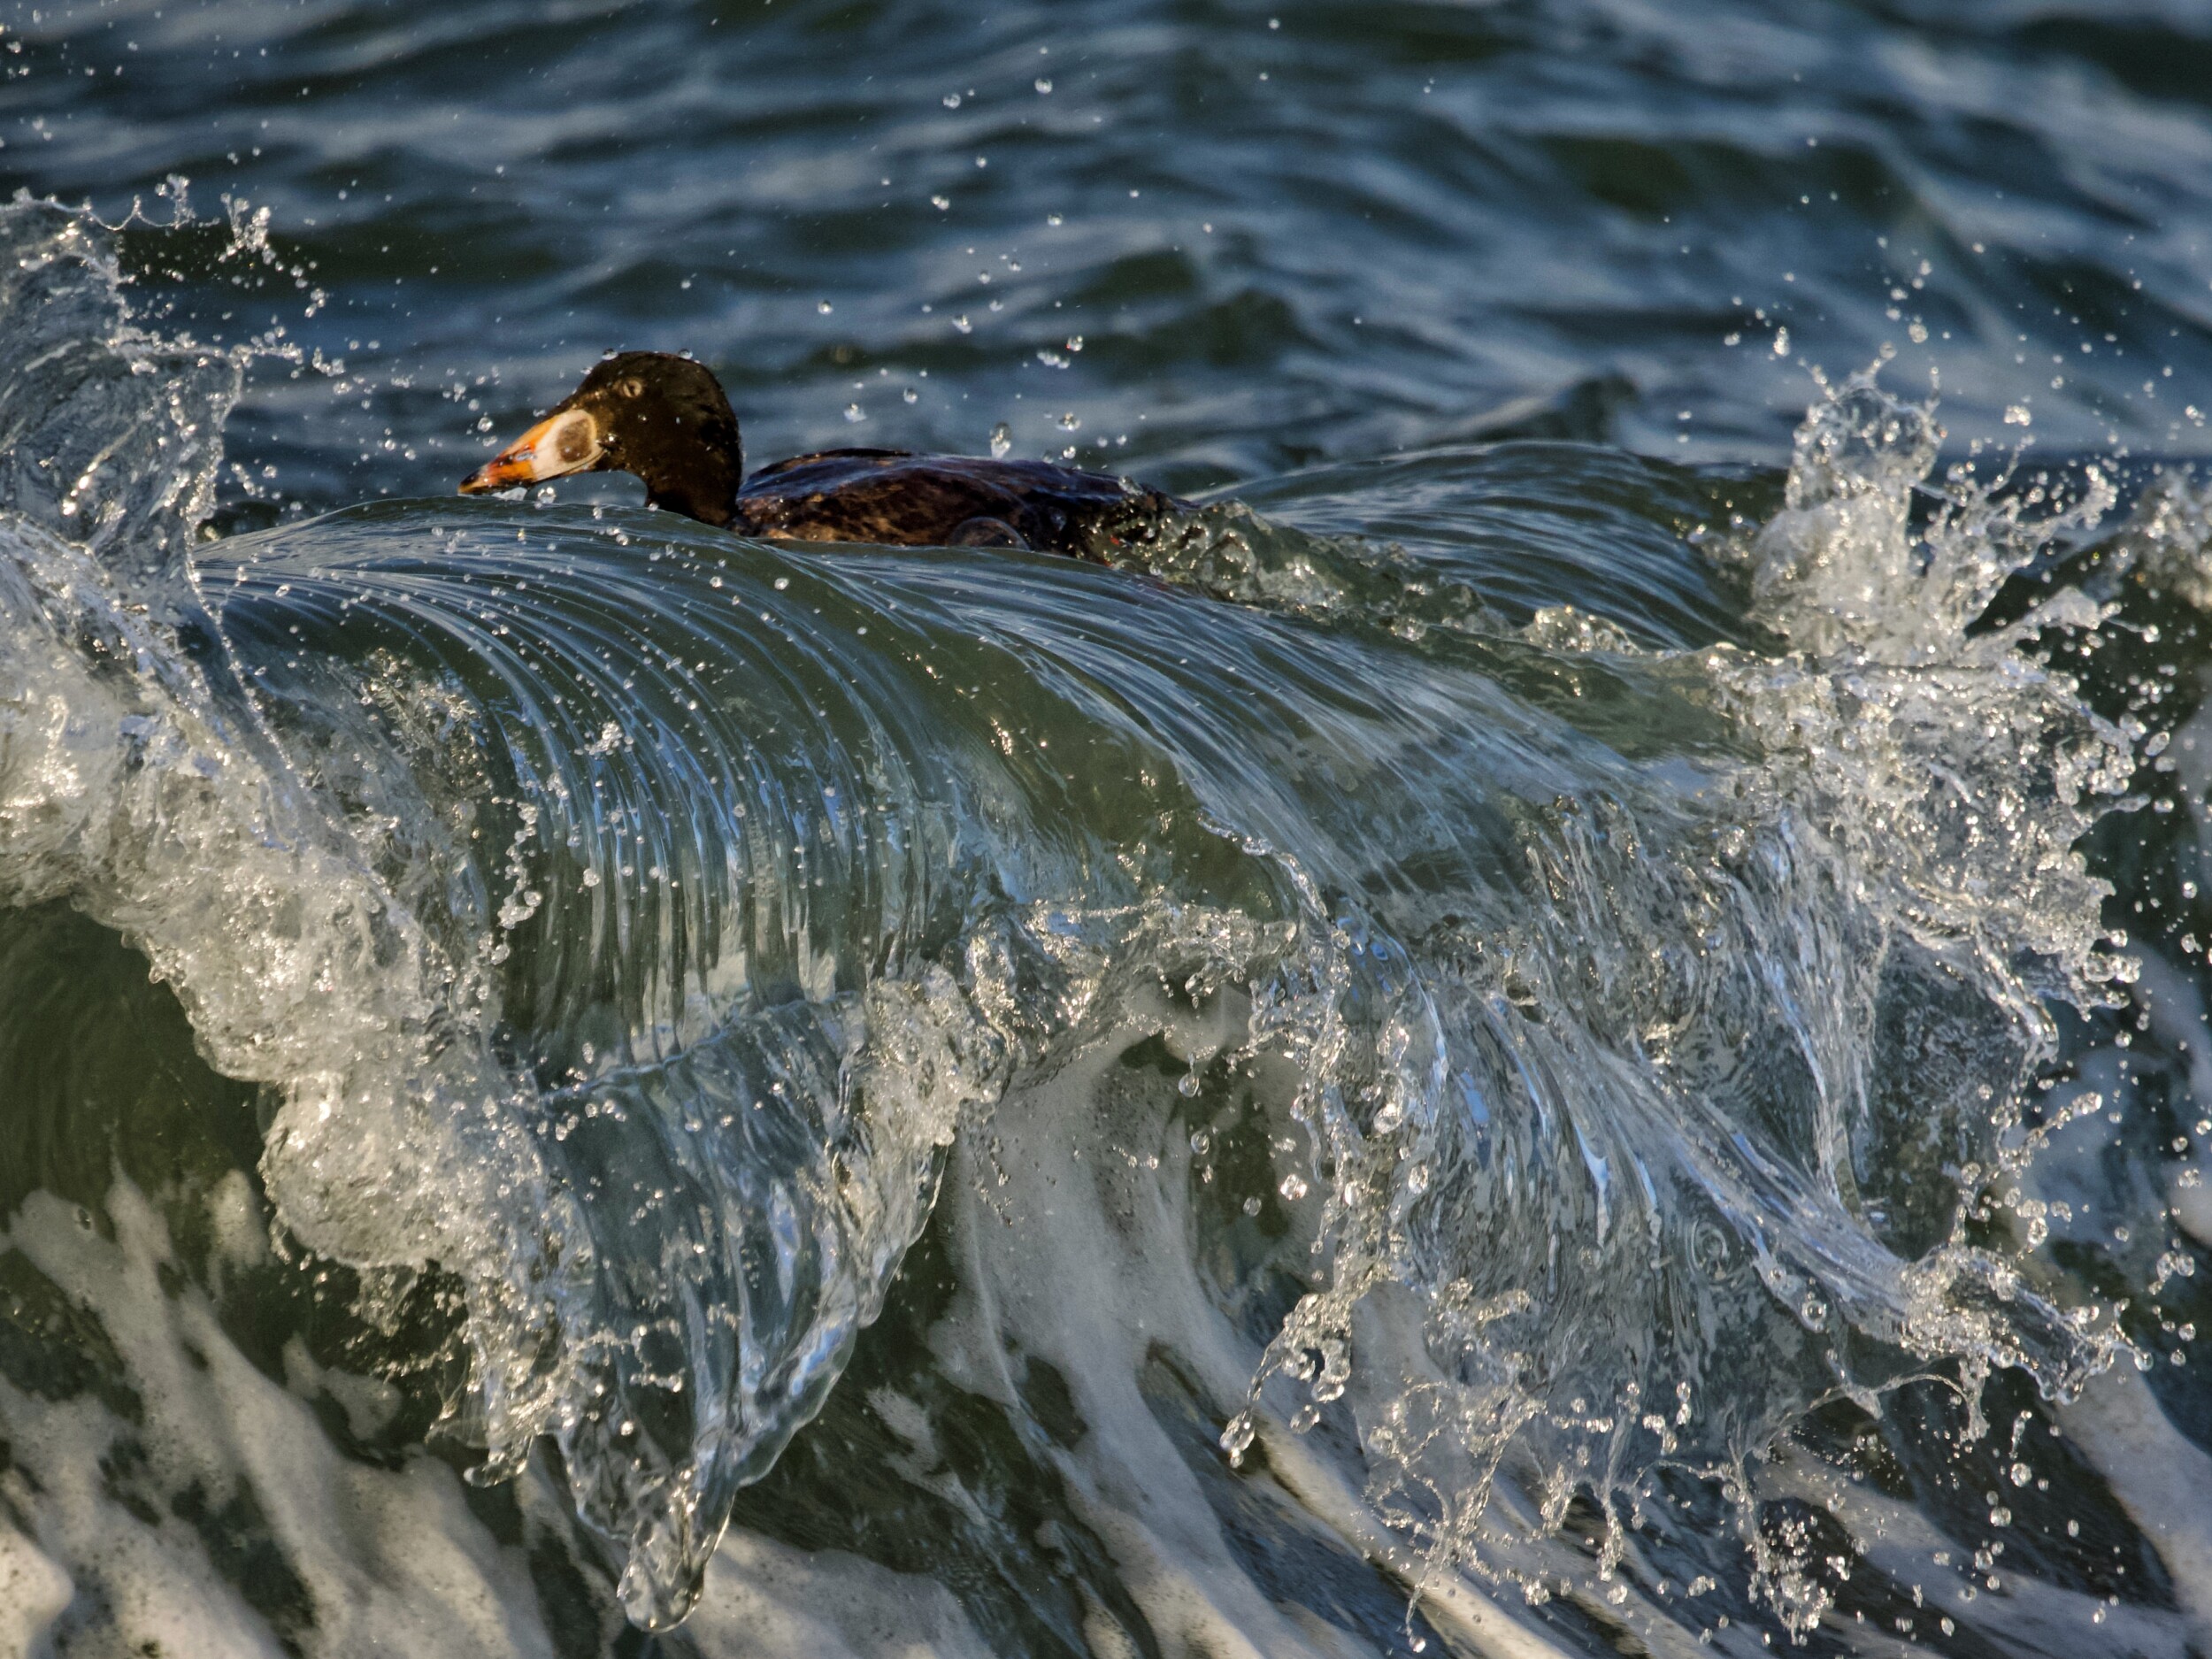 Surf Scoter in the Surf